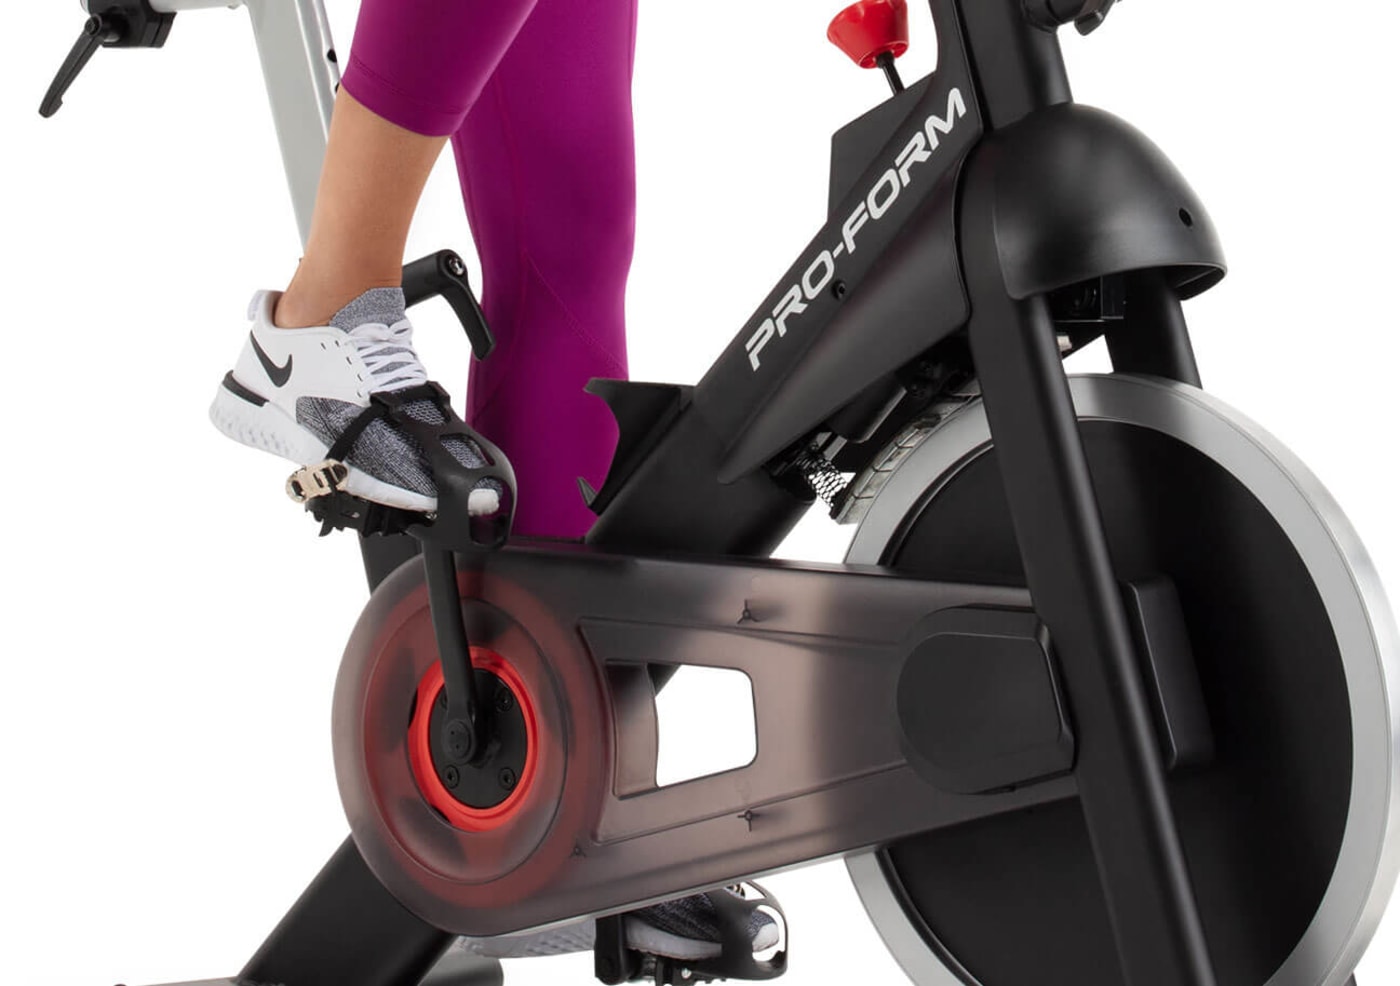 image of a woman pedaling the exercise bike